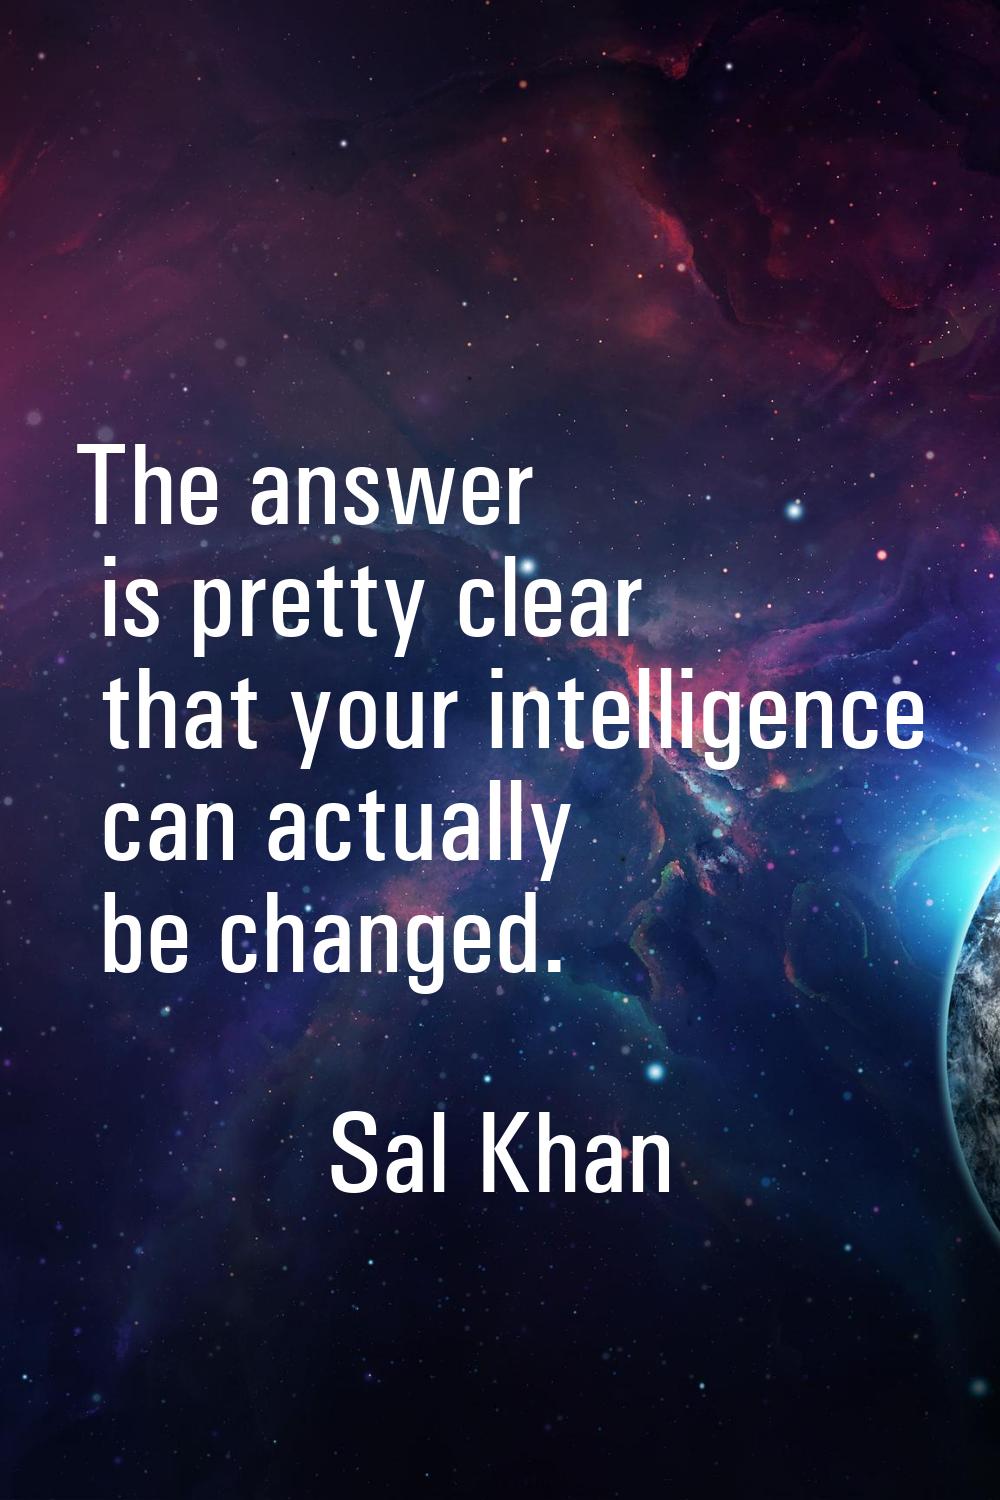 The answer is pretty clear that your intelligence can actually be changed.